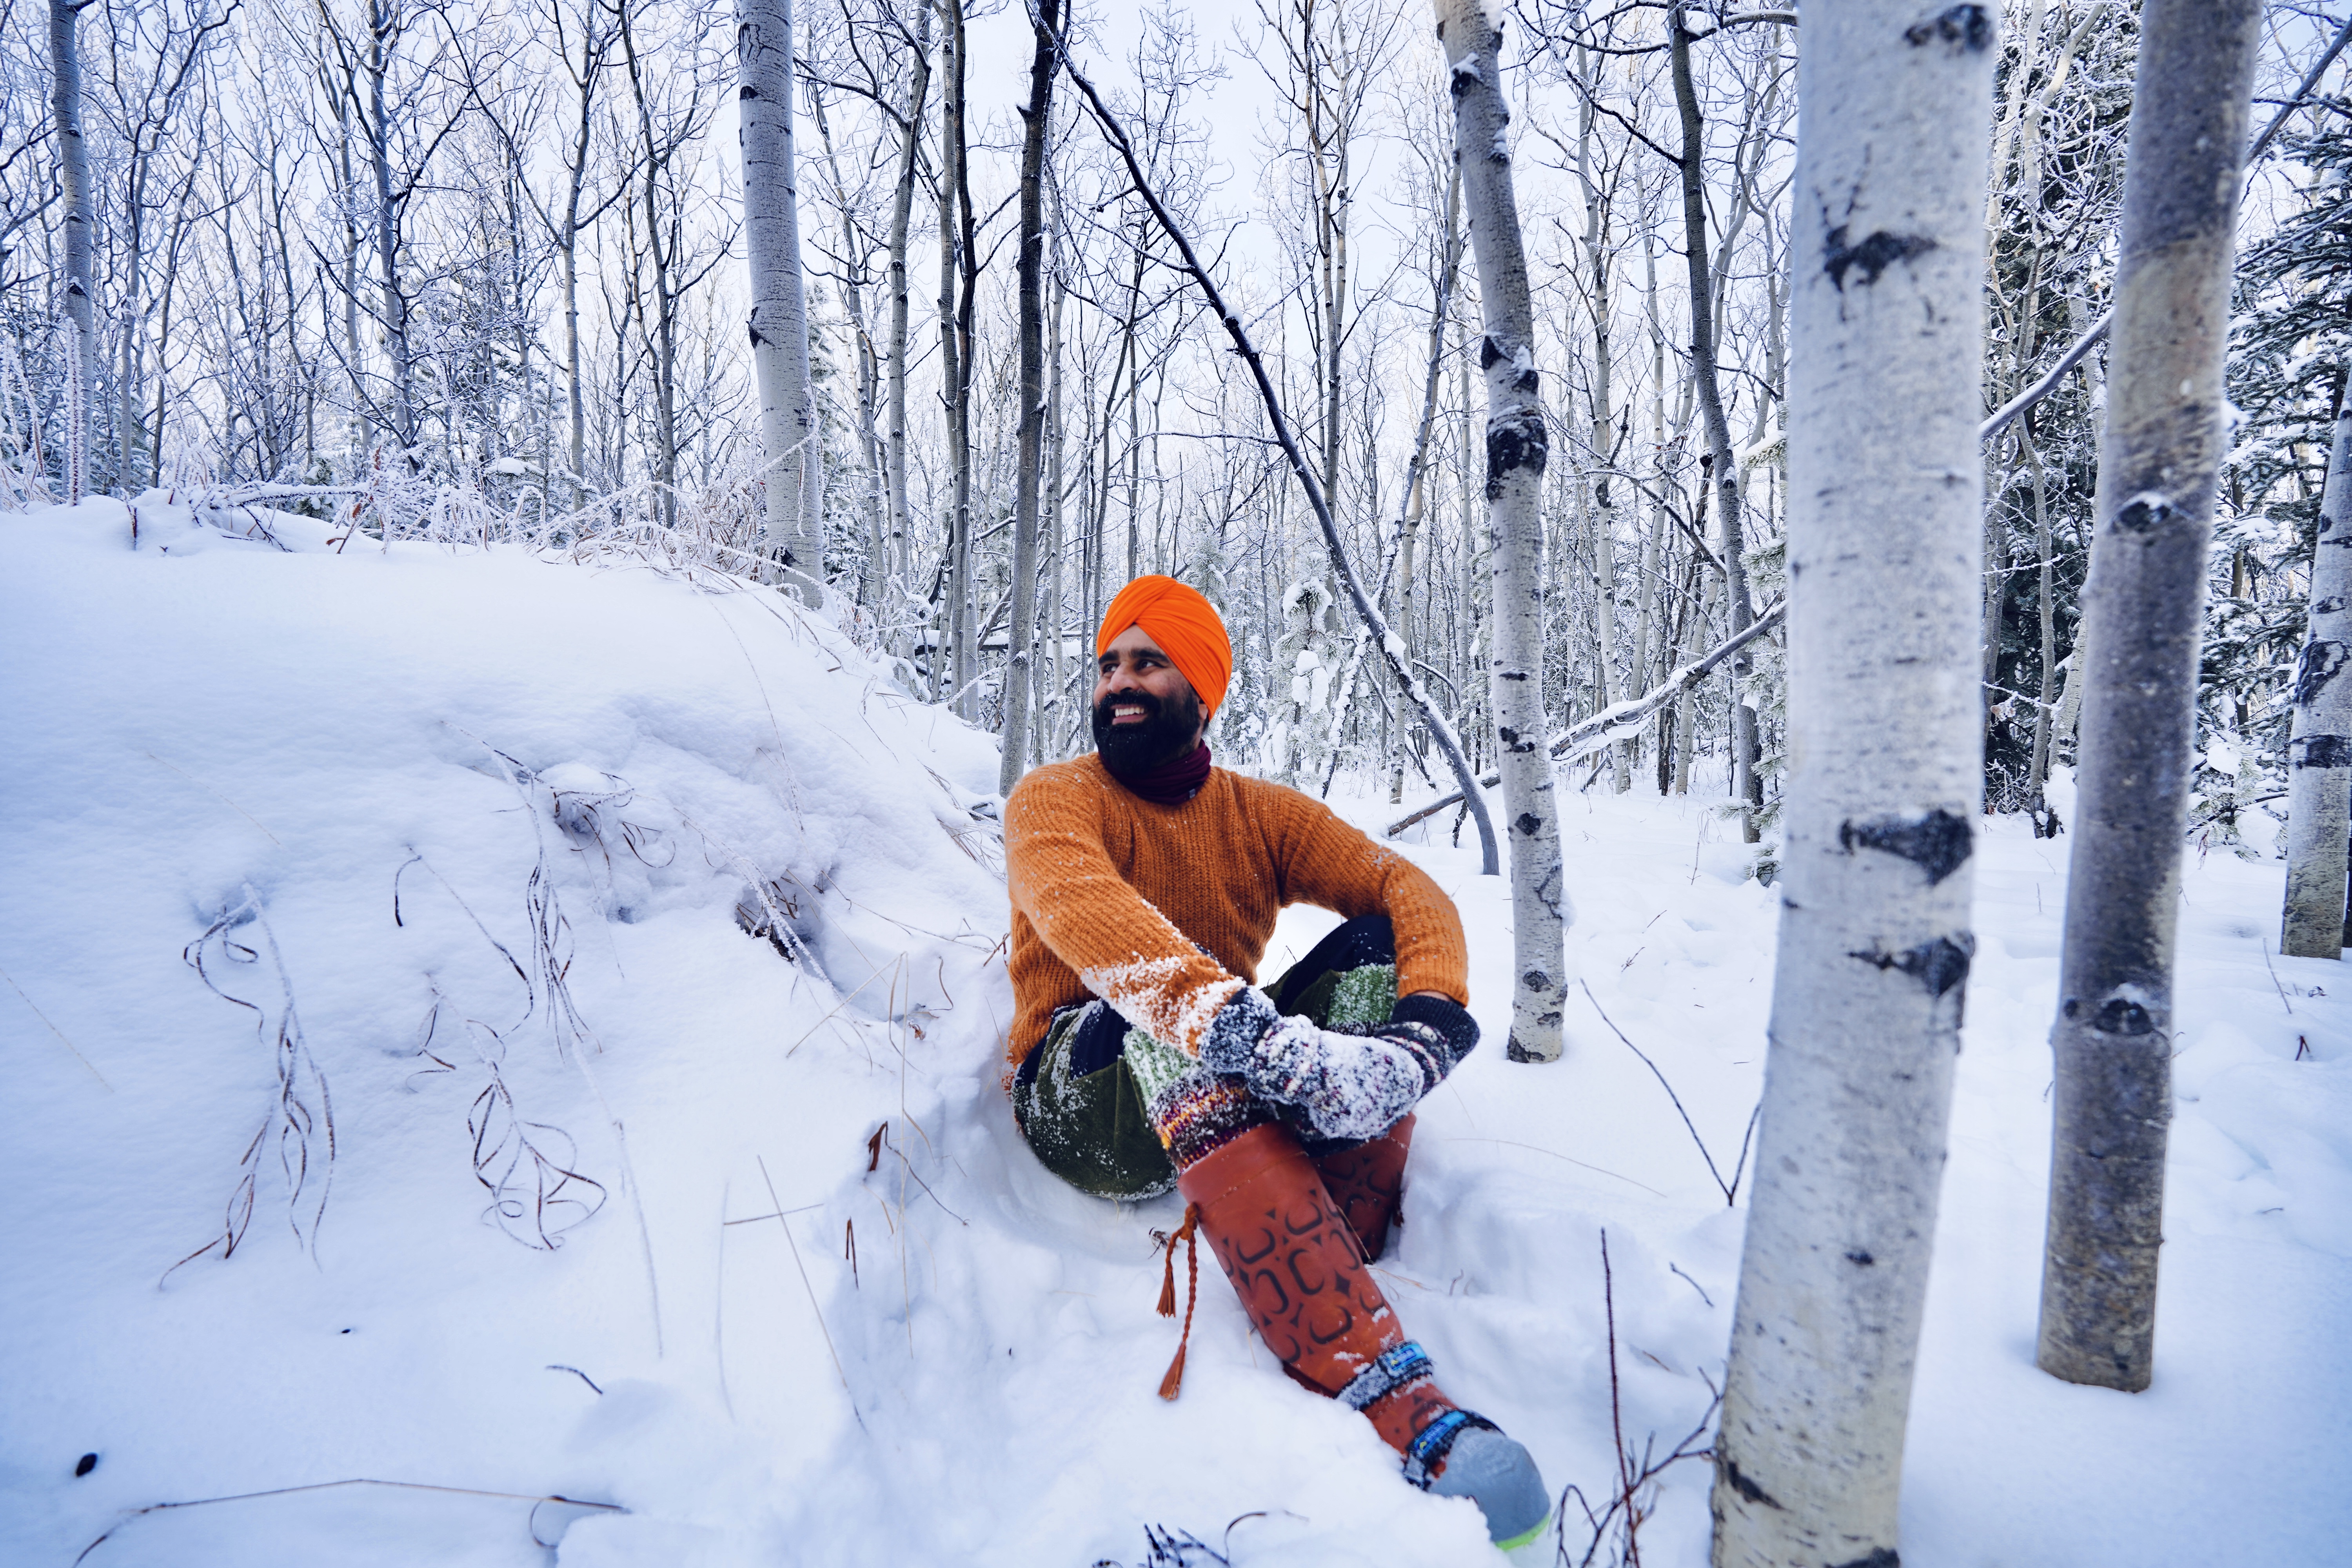 Gurdeep Pandher, wearing an orange top, sits in the snow among the trees. 